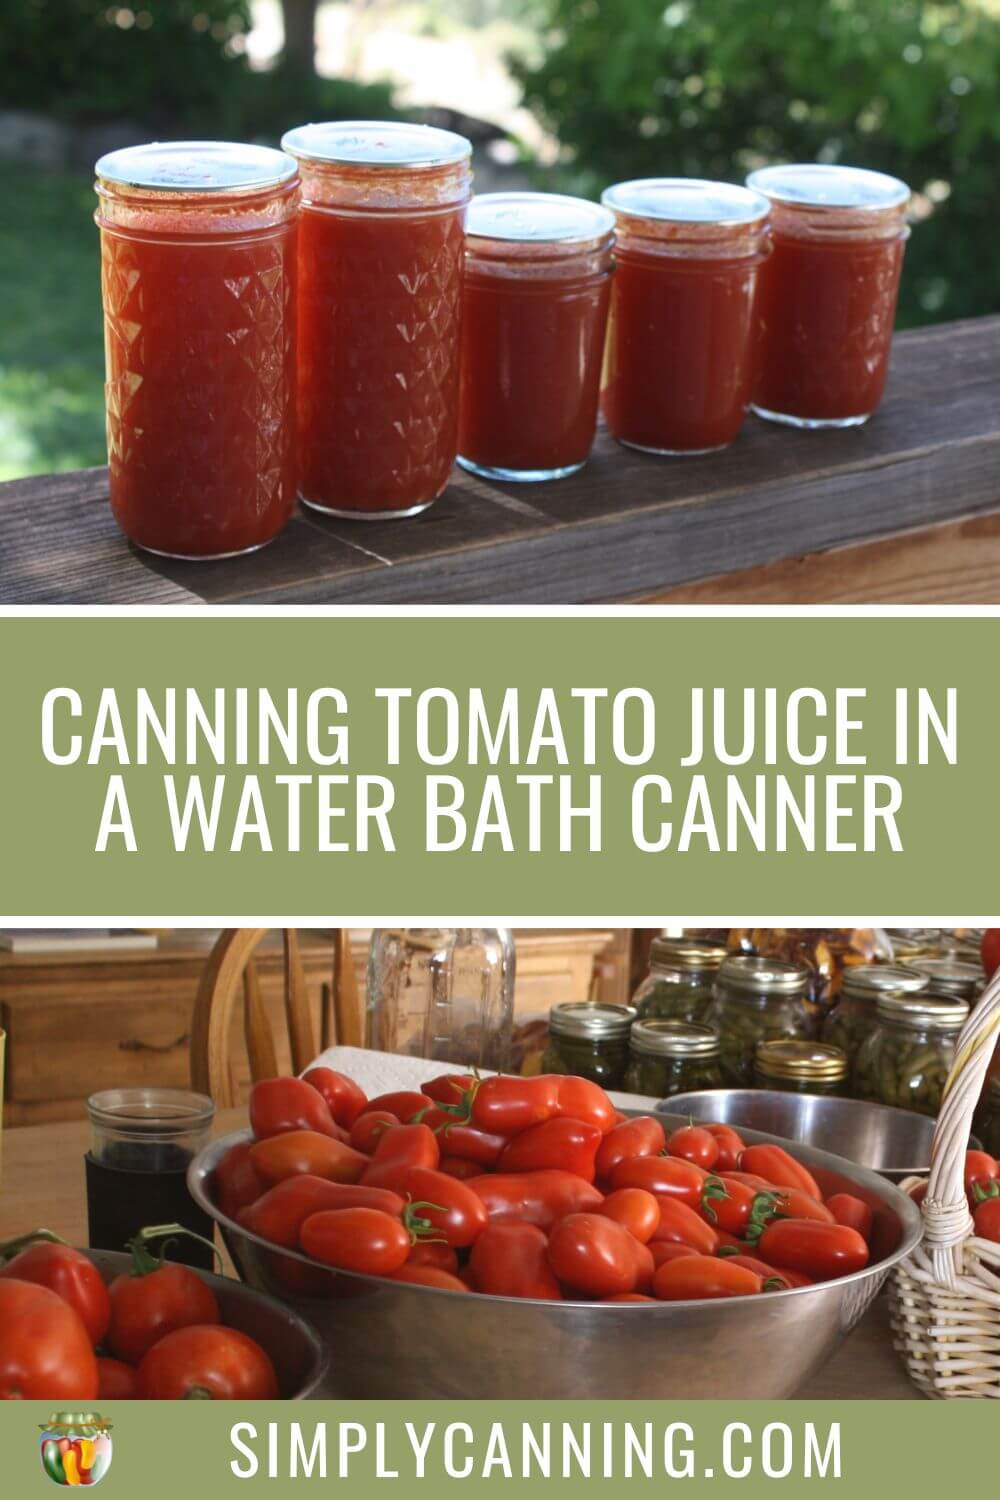 Pinnable image with jars of tomato sauce at the top, a variety of tomatoes sitting on a kitchen counter on the bottom, labeled "Canning tomato juice in a water bath canner".